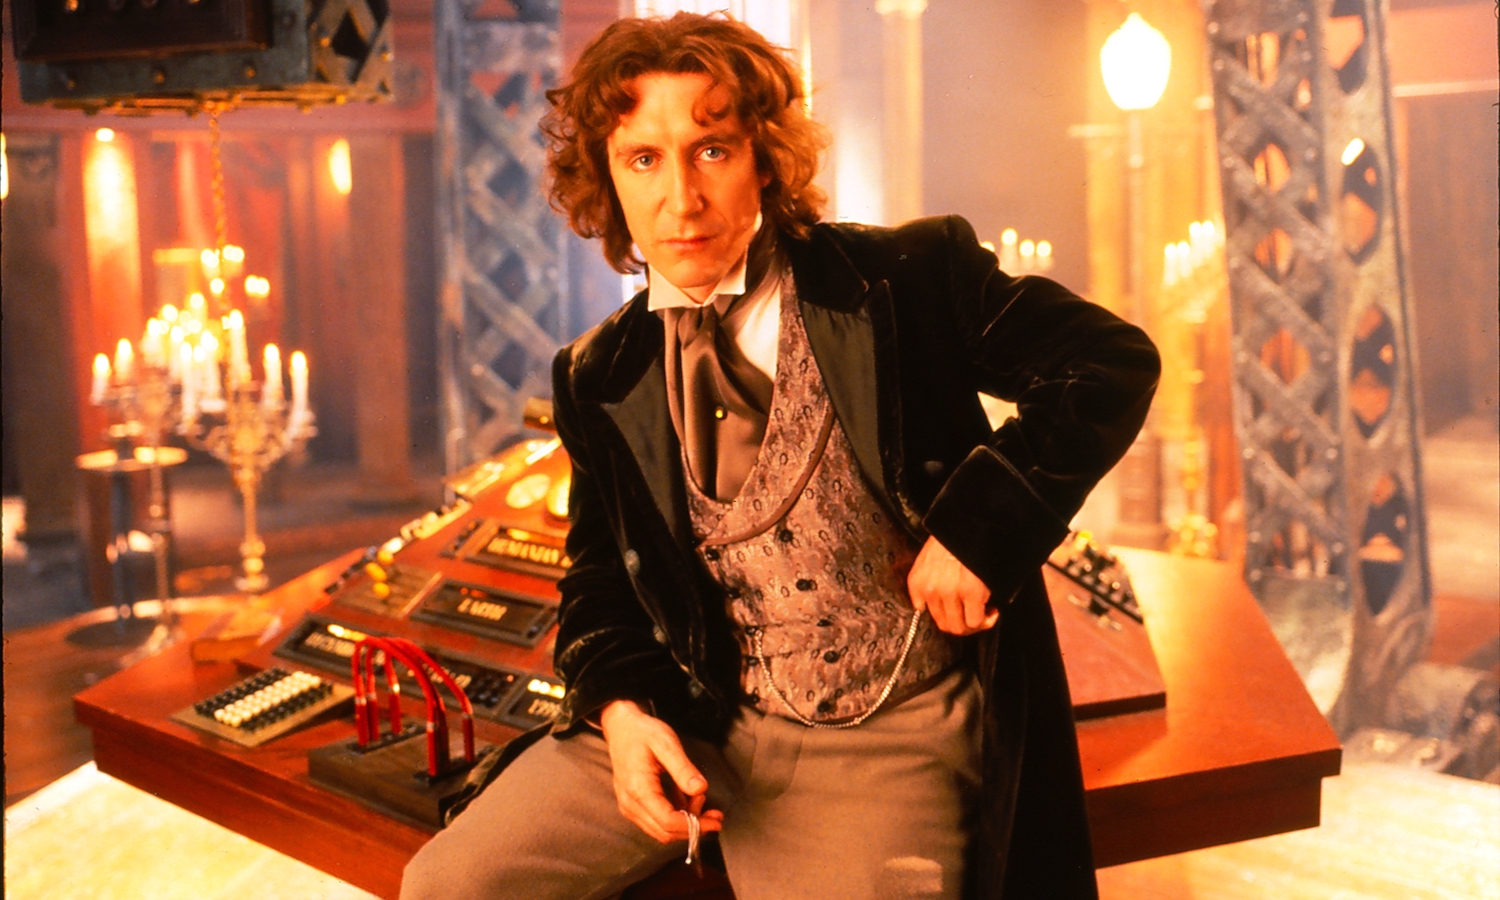 Paul McGann in the infamous "Doctor Who" movie